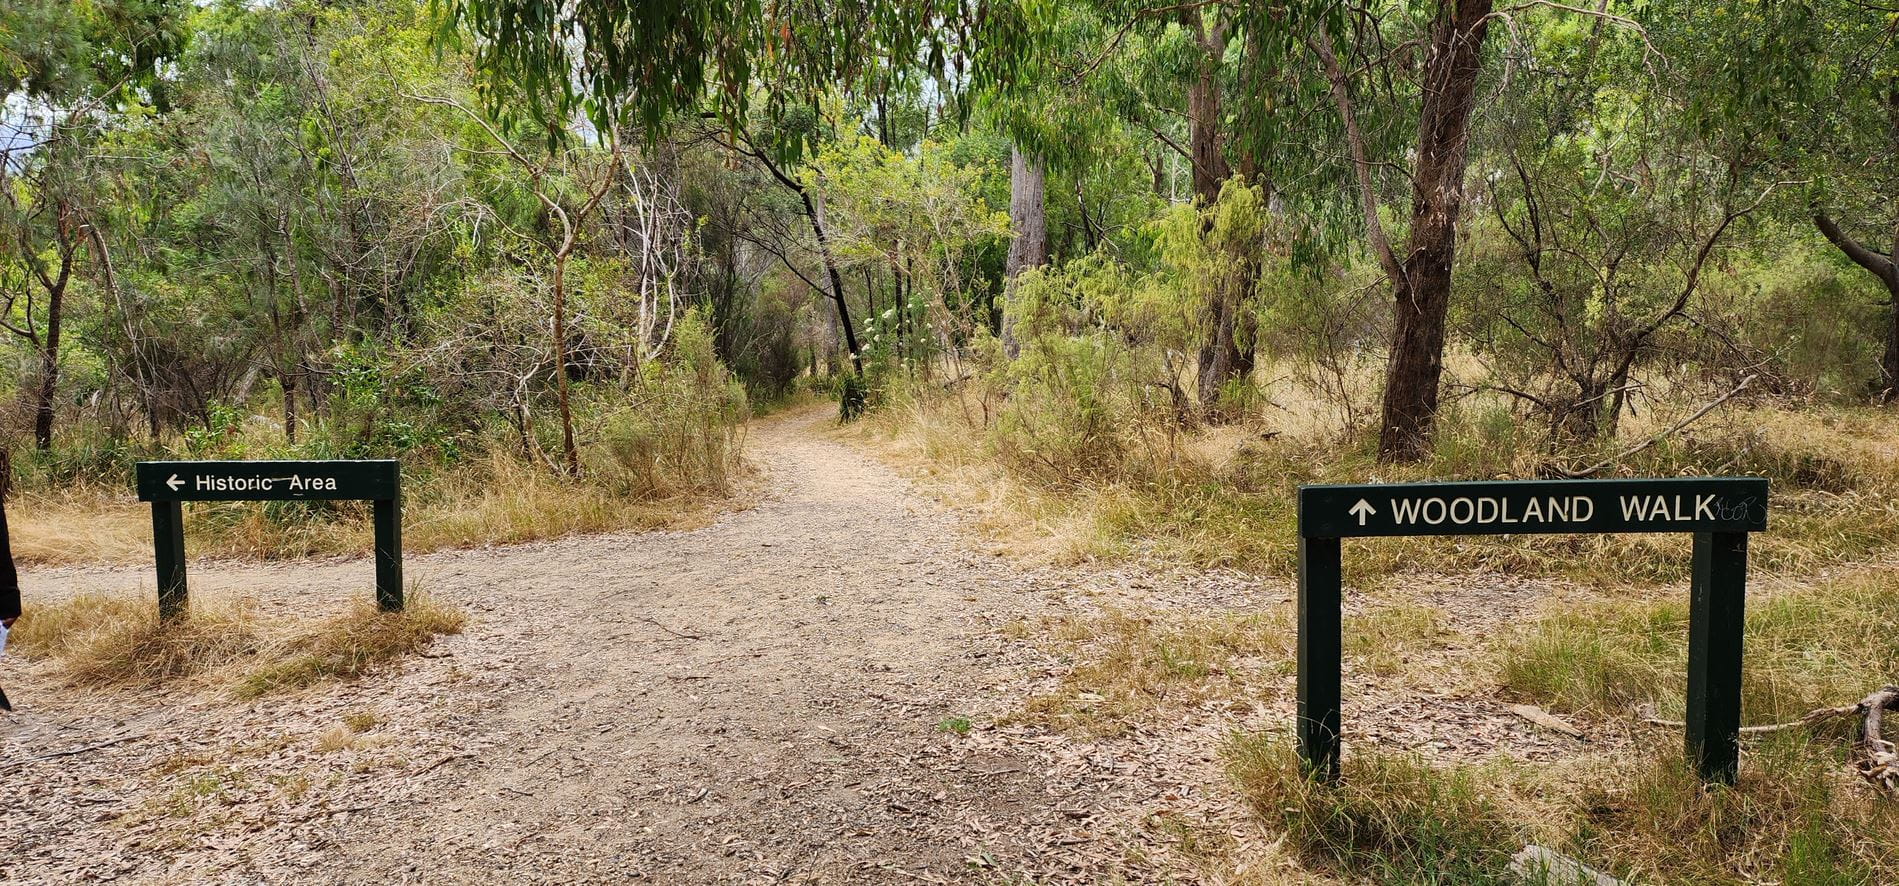 Image shows gravel path with a sign to the right reading 'woodland walk' and a sign to the left reading 'historic area'. The gravel path is surrounded by overgrown weeds and grass tall gum trees.